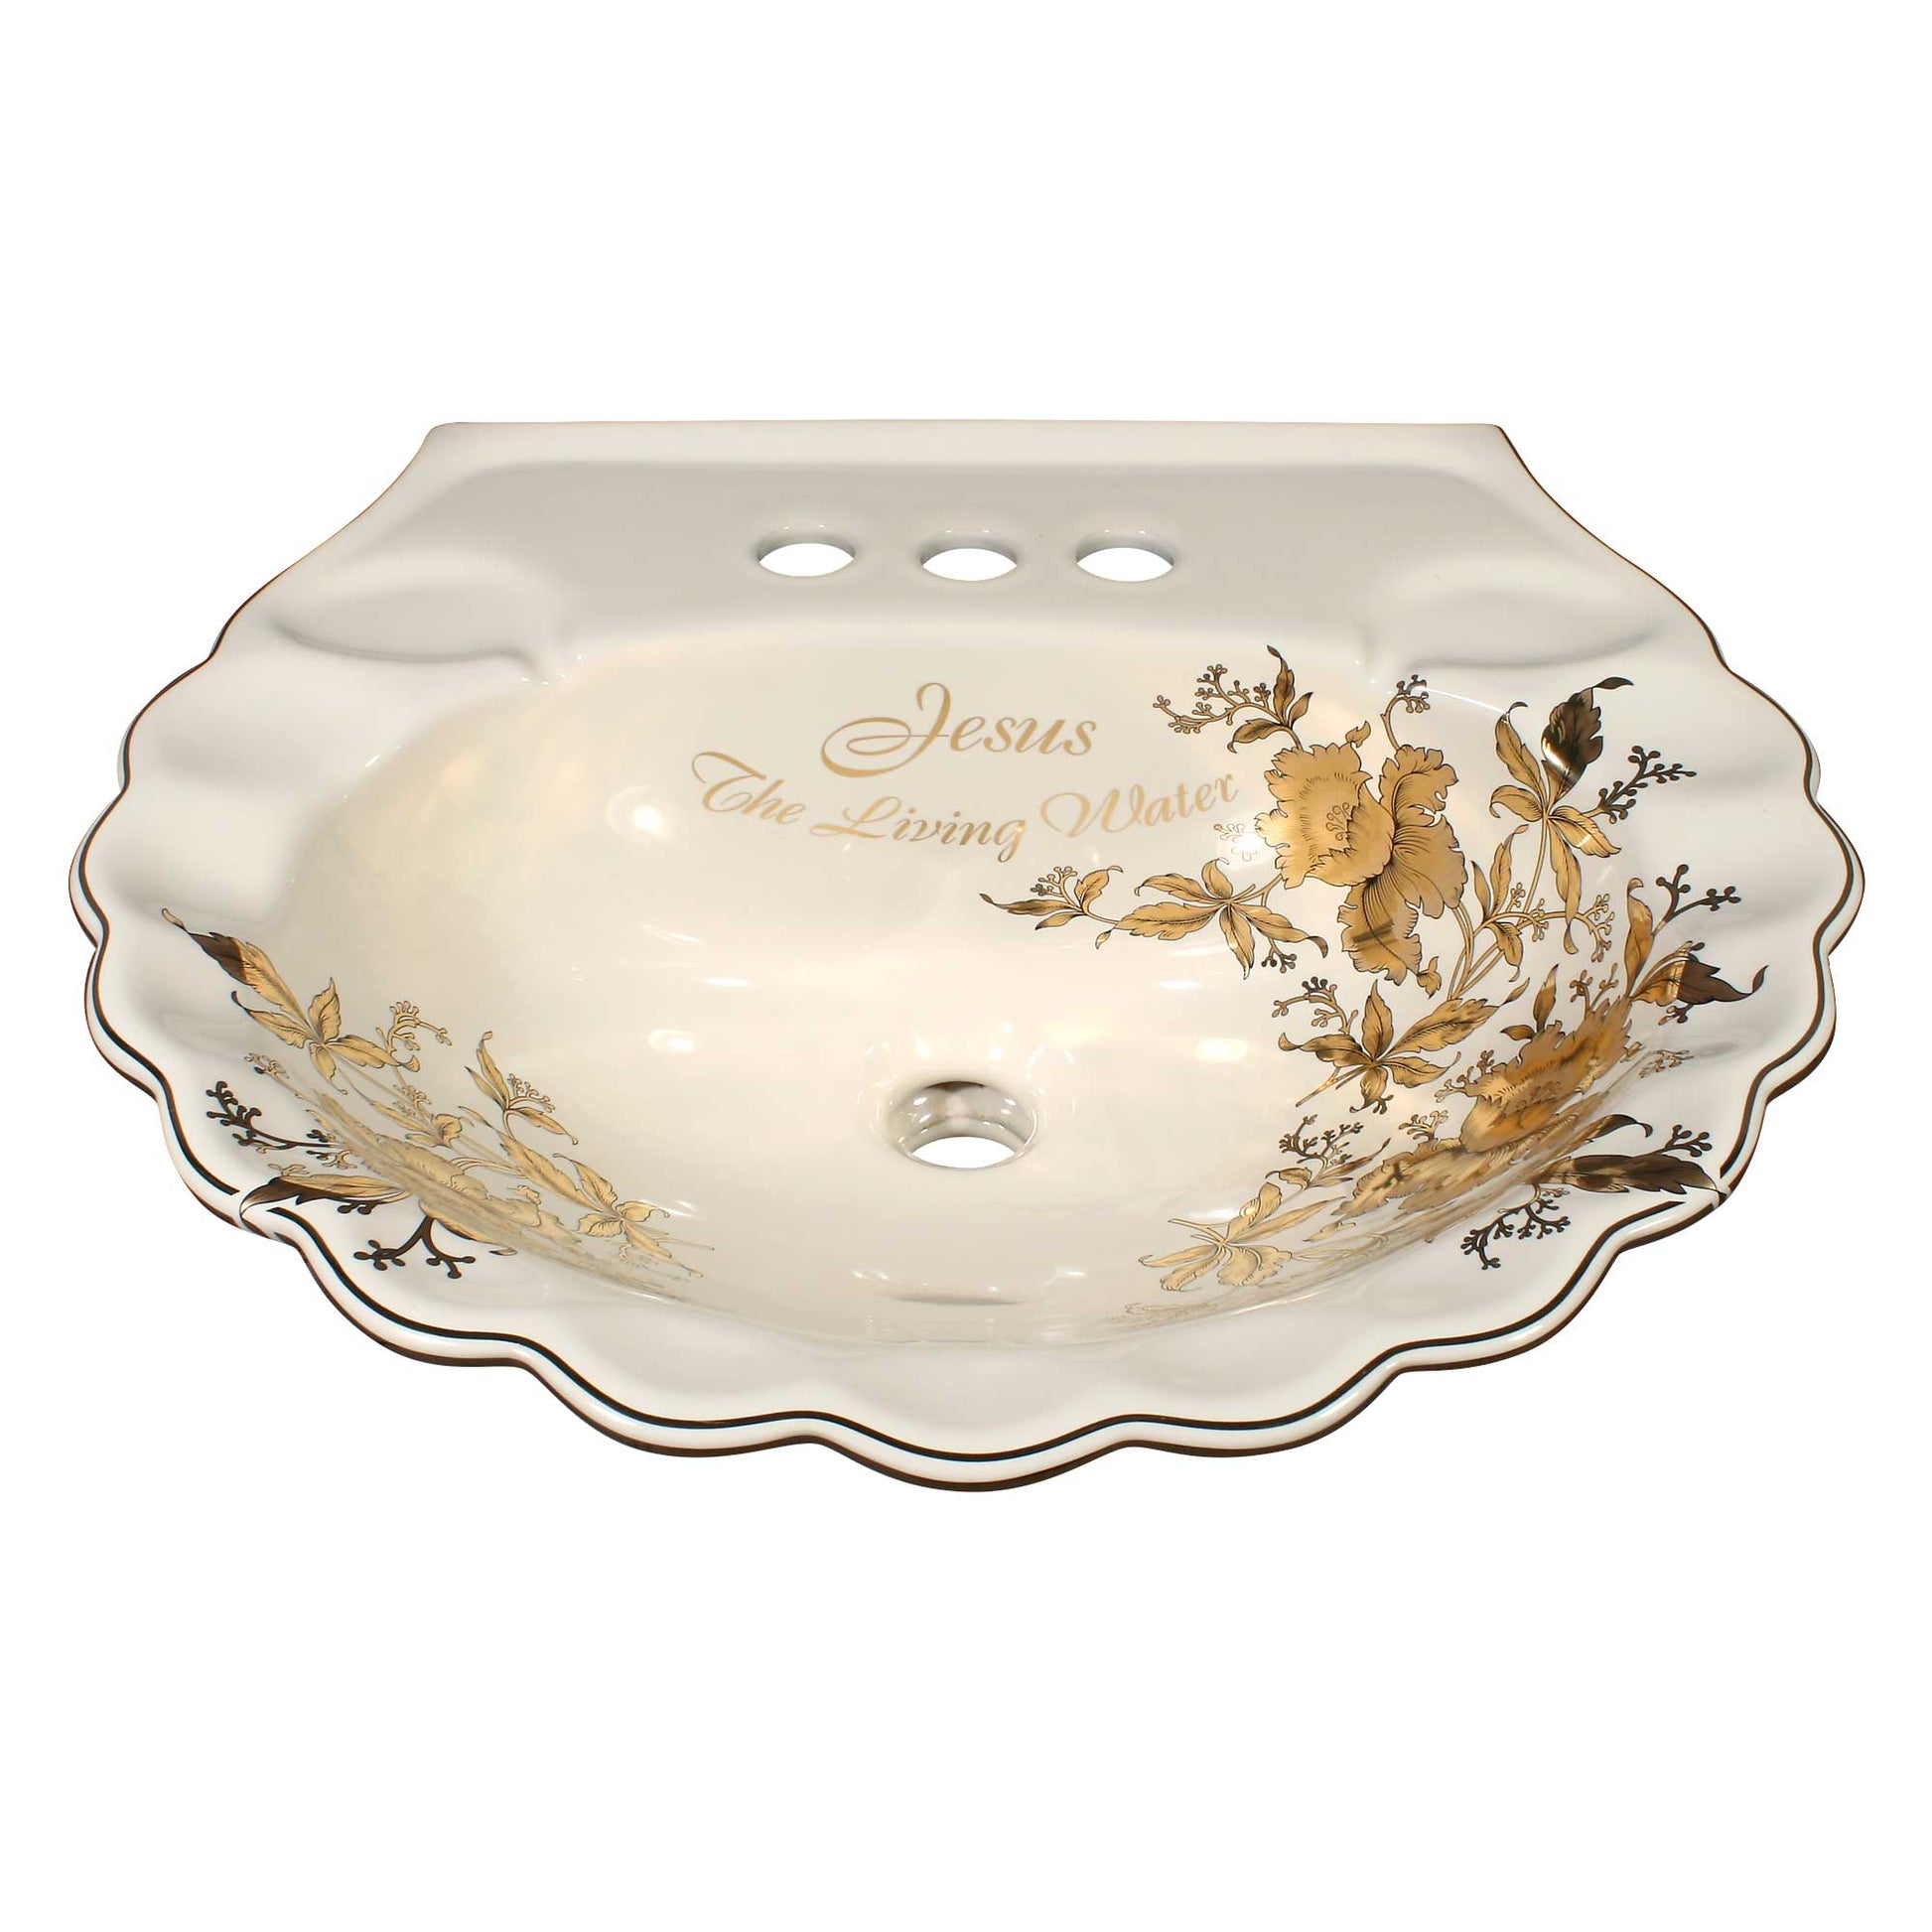 Gold Orchids painted sink bowl with spiritual script "Jesus the Living Water"